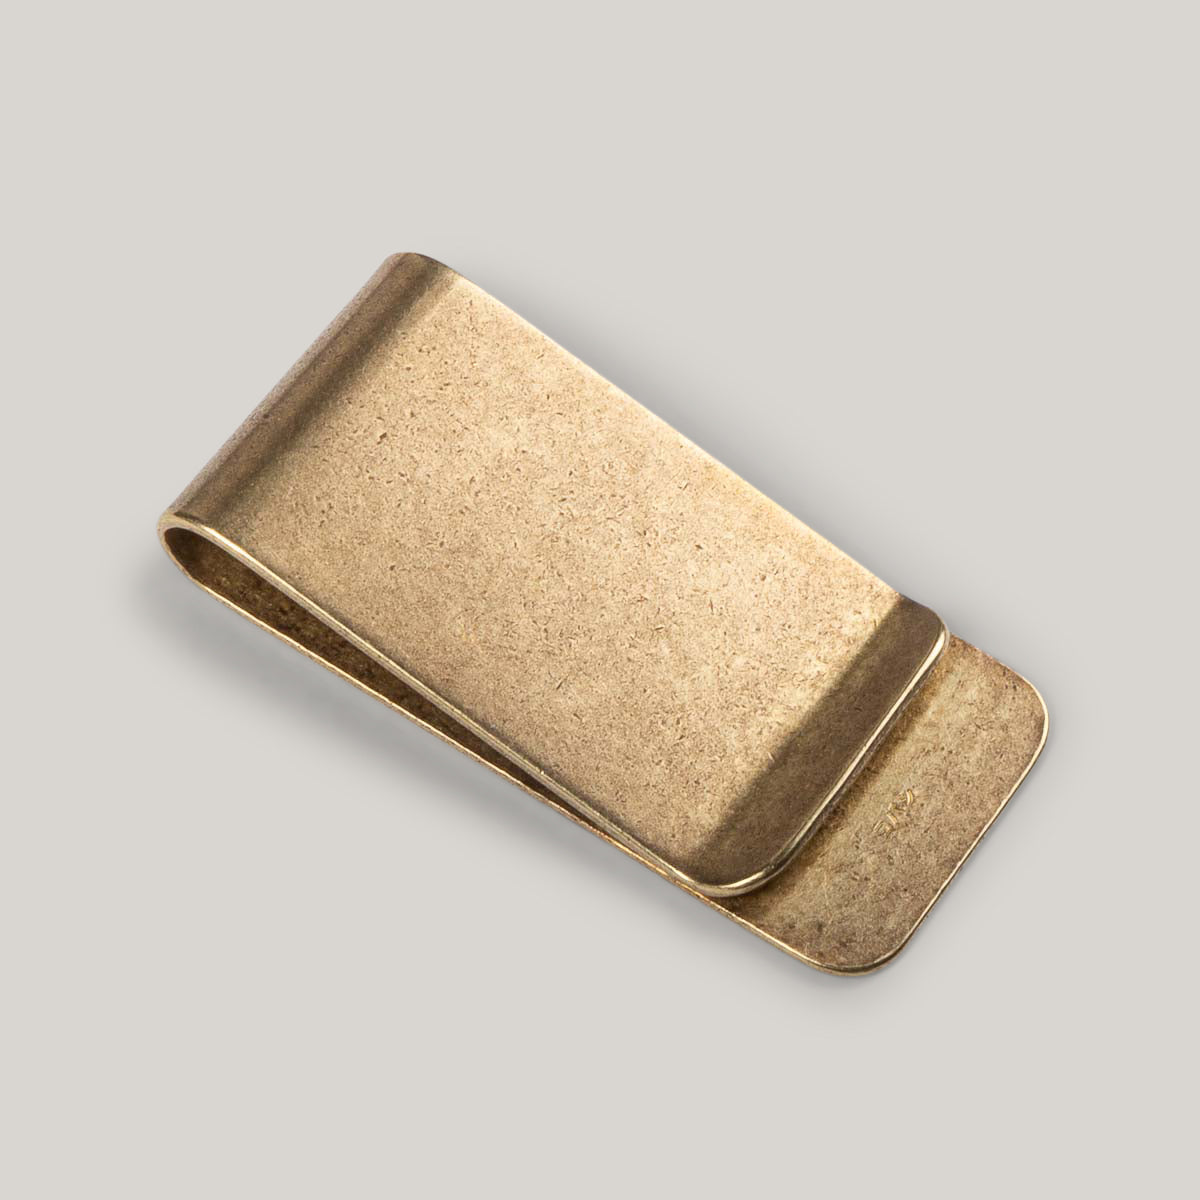 KOBASHI STUDIO BRASS MONEY CLIP – Pickings and Parry